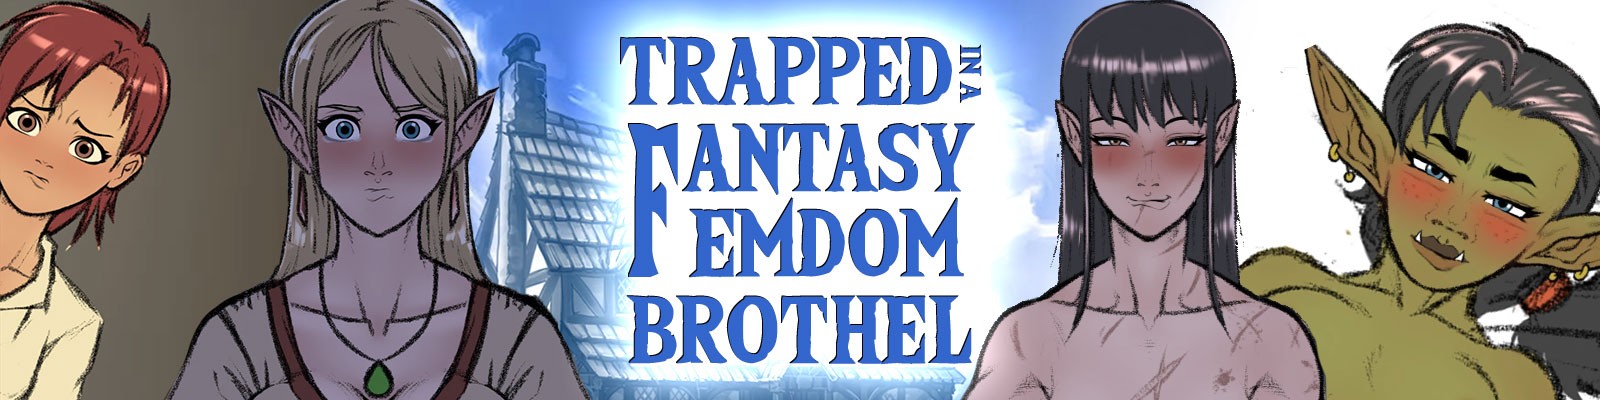 Trapped In A Fantasy Femdom Brothel Adult Game Android Apk Download (1)